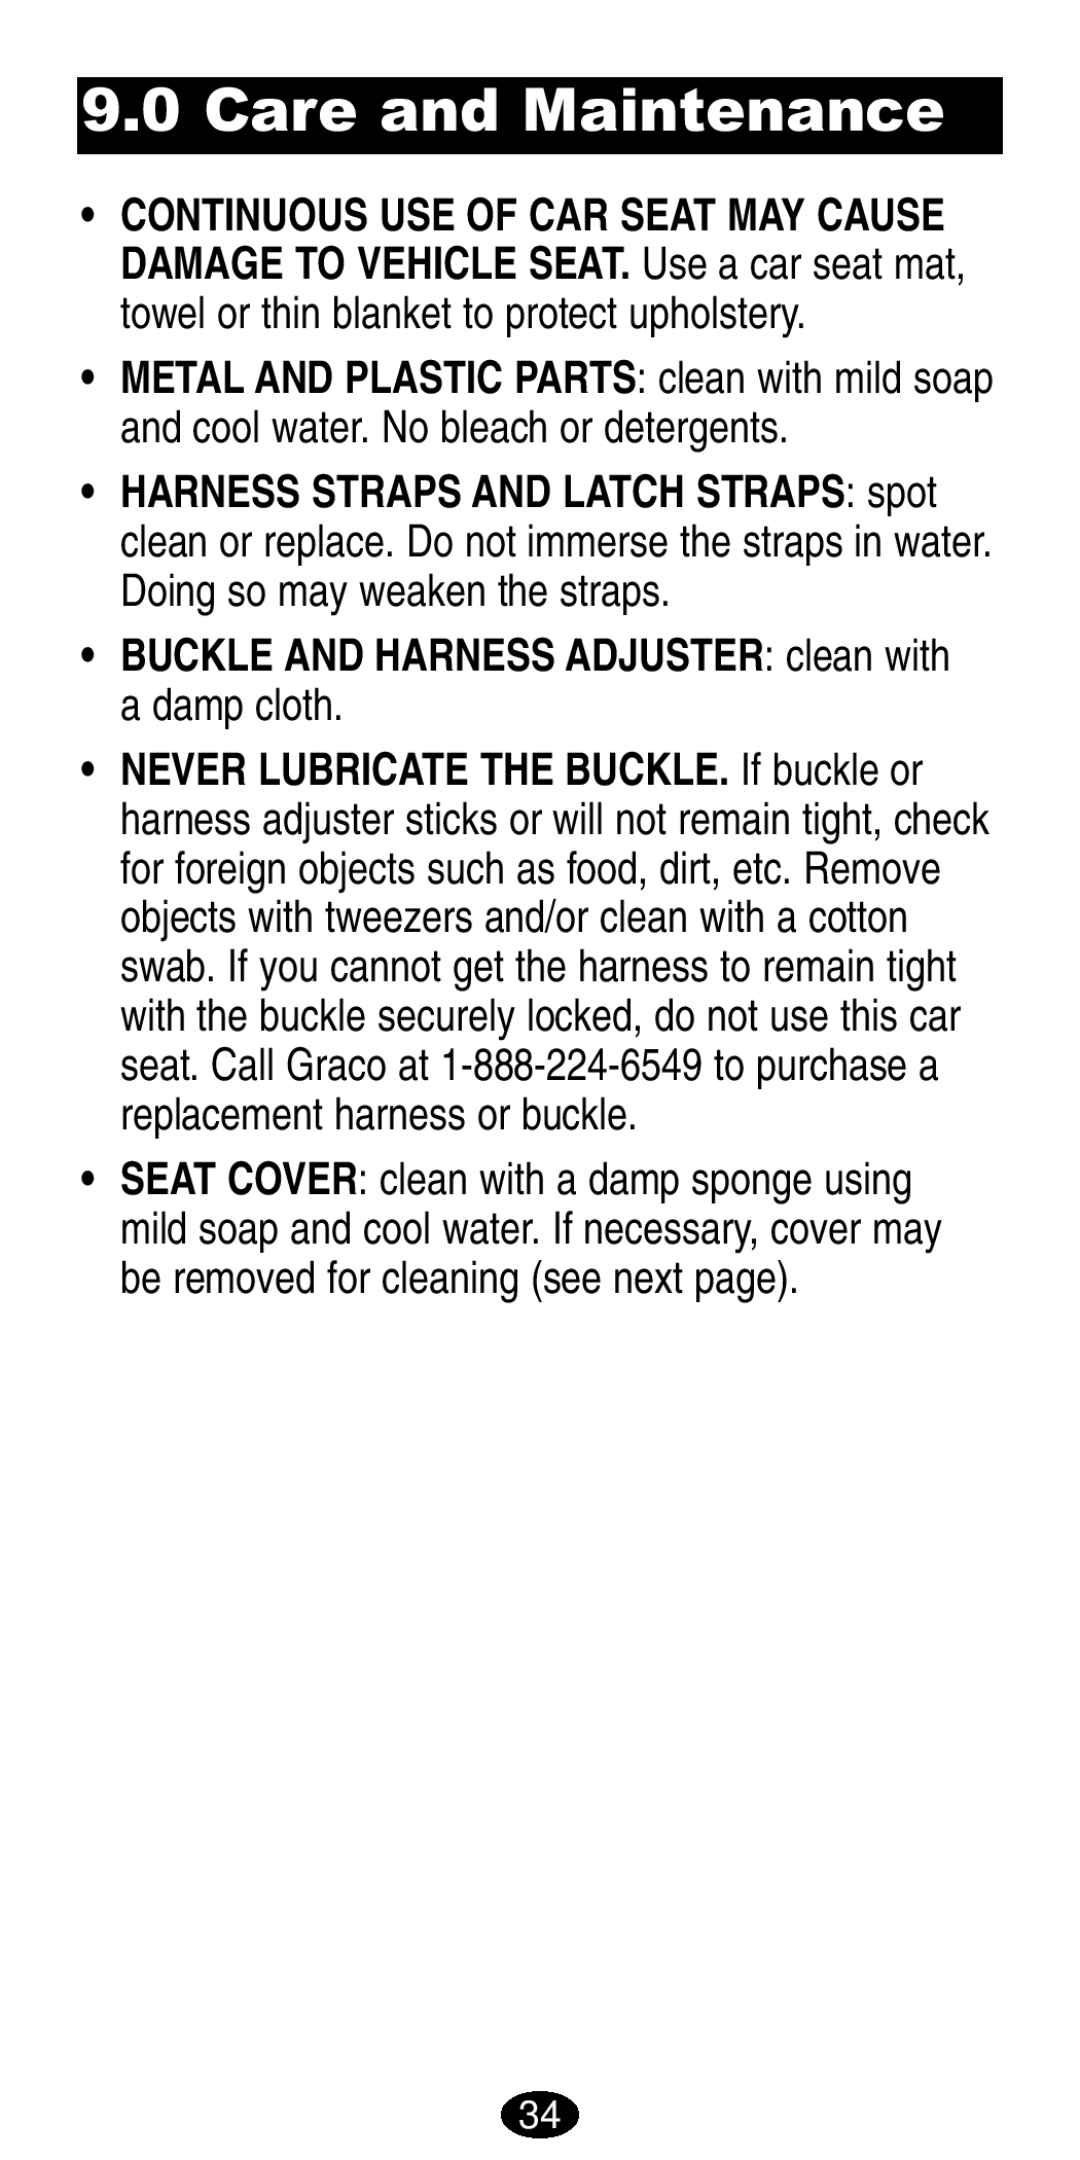 Graco 8490, 8486 manual Care and Maintenance, BUCKLE AND HARNESS ADJUSTER clean with a damp cloth 